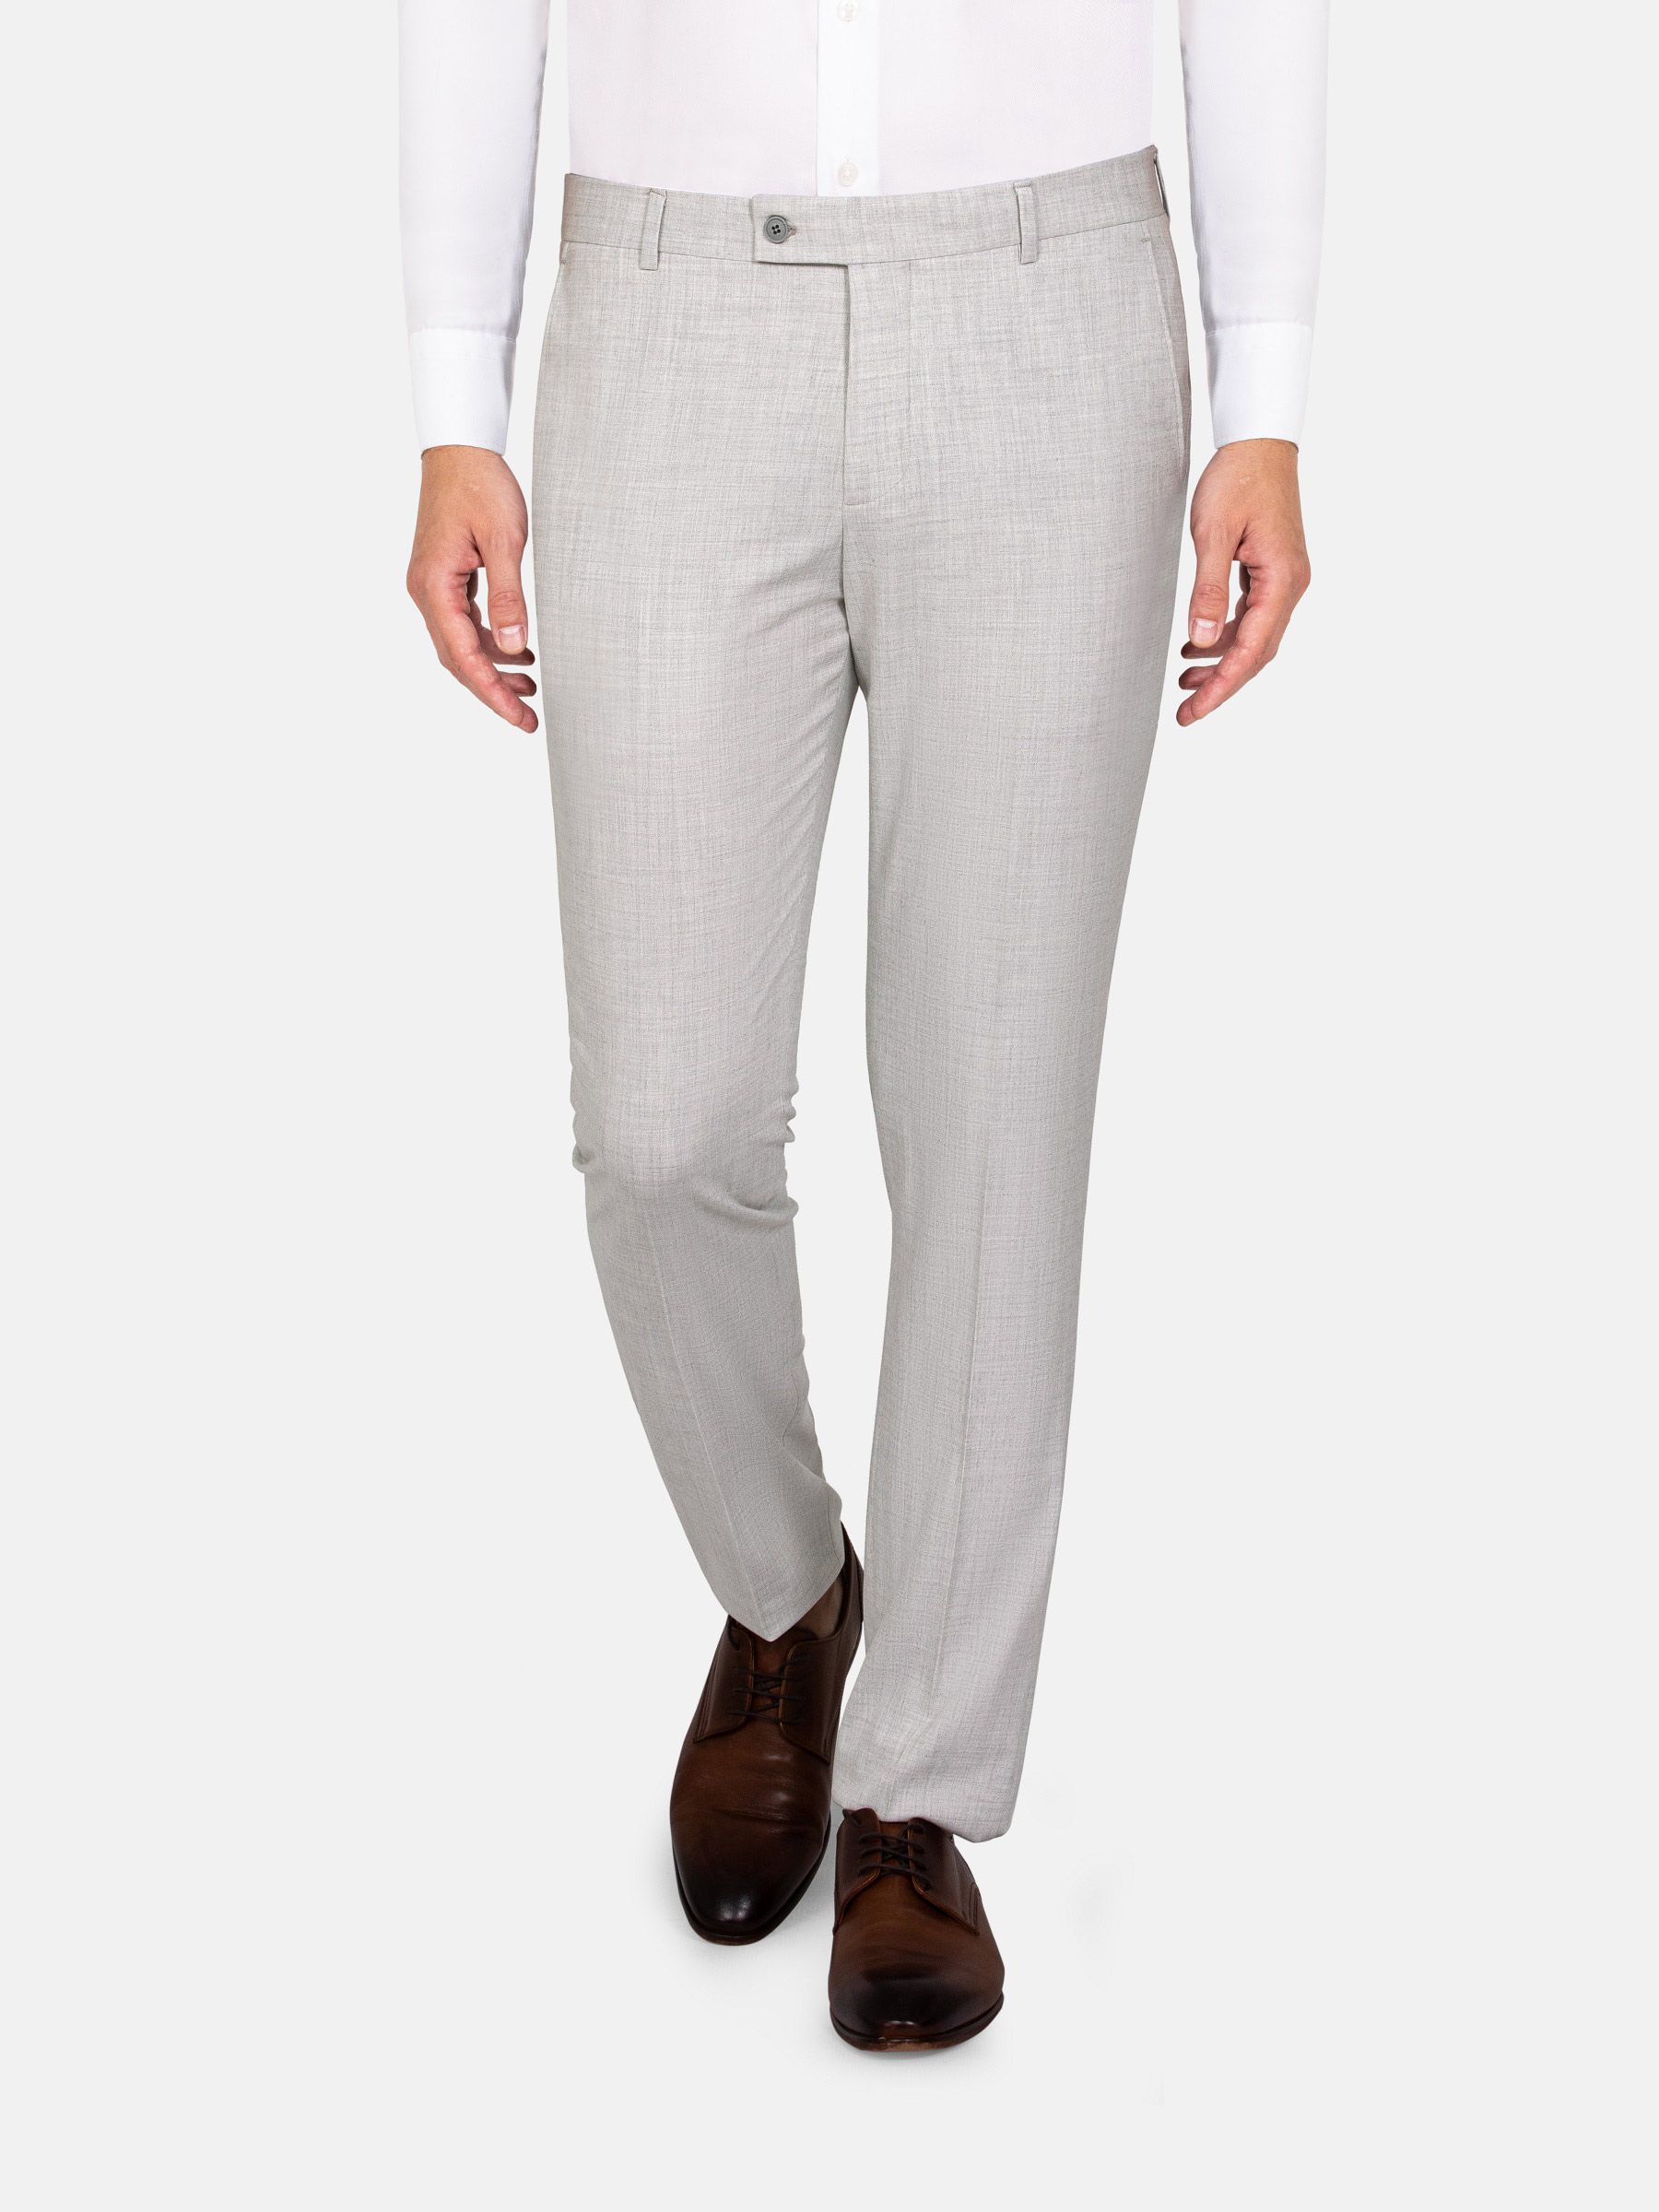 White Slim Fit Wedding Pants For Men Business Suit, Casual & Formal Formal  Trousers For Men 201106 From Bai02, $43.24 | DHgate.Com